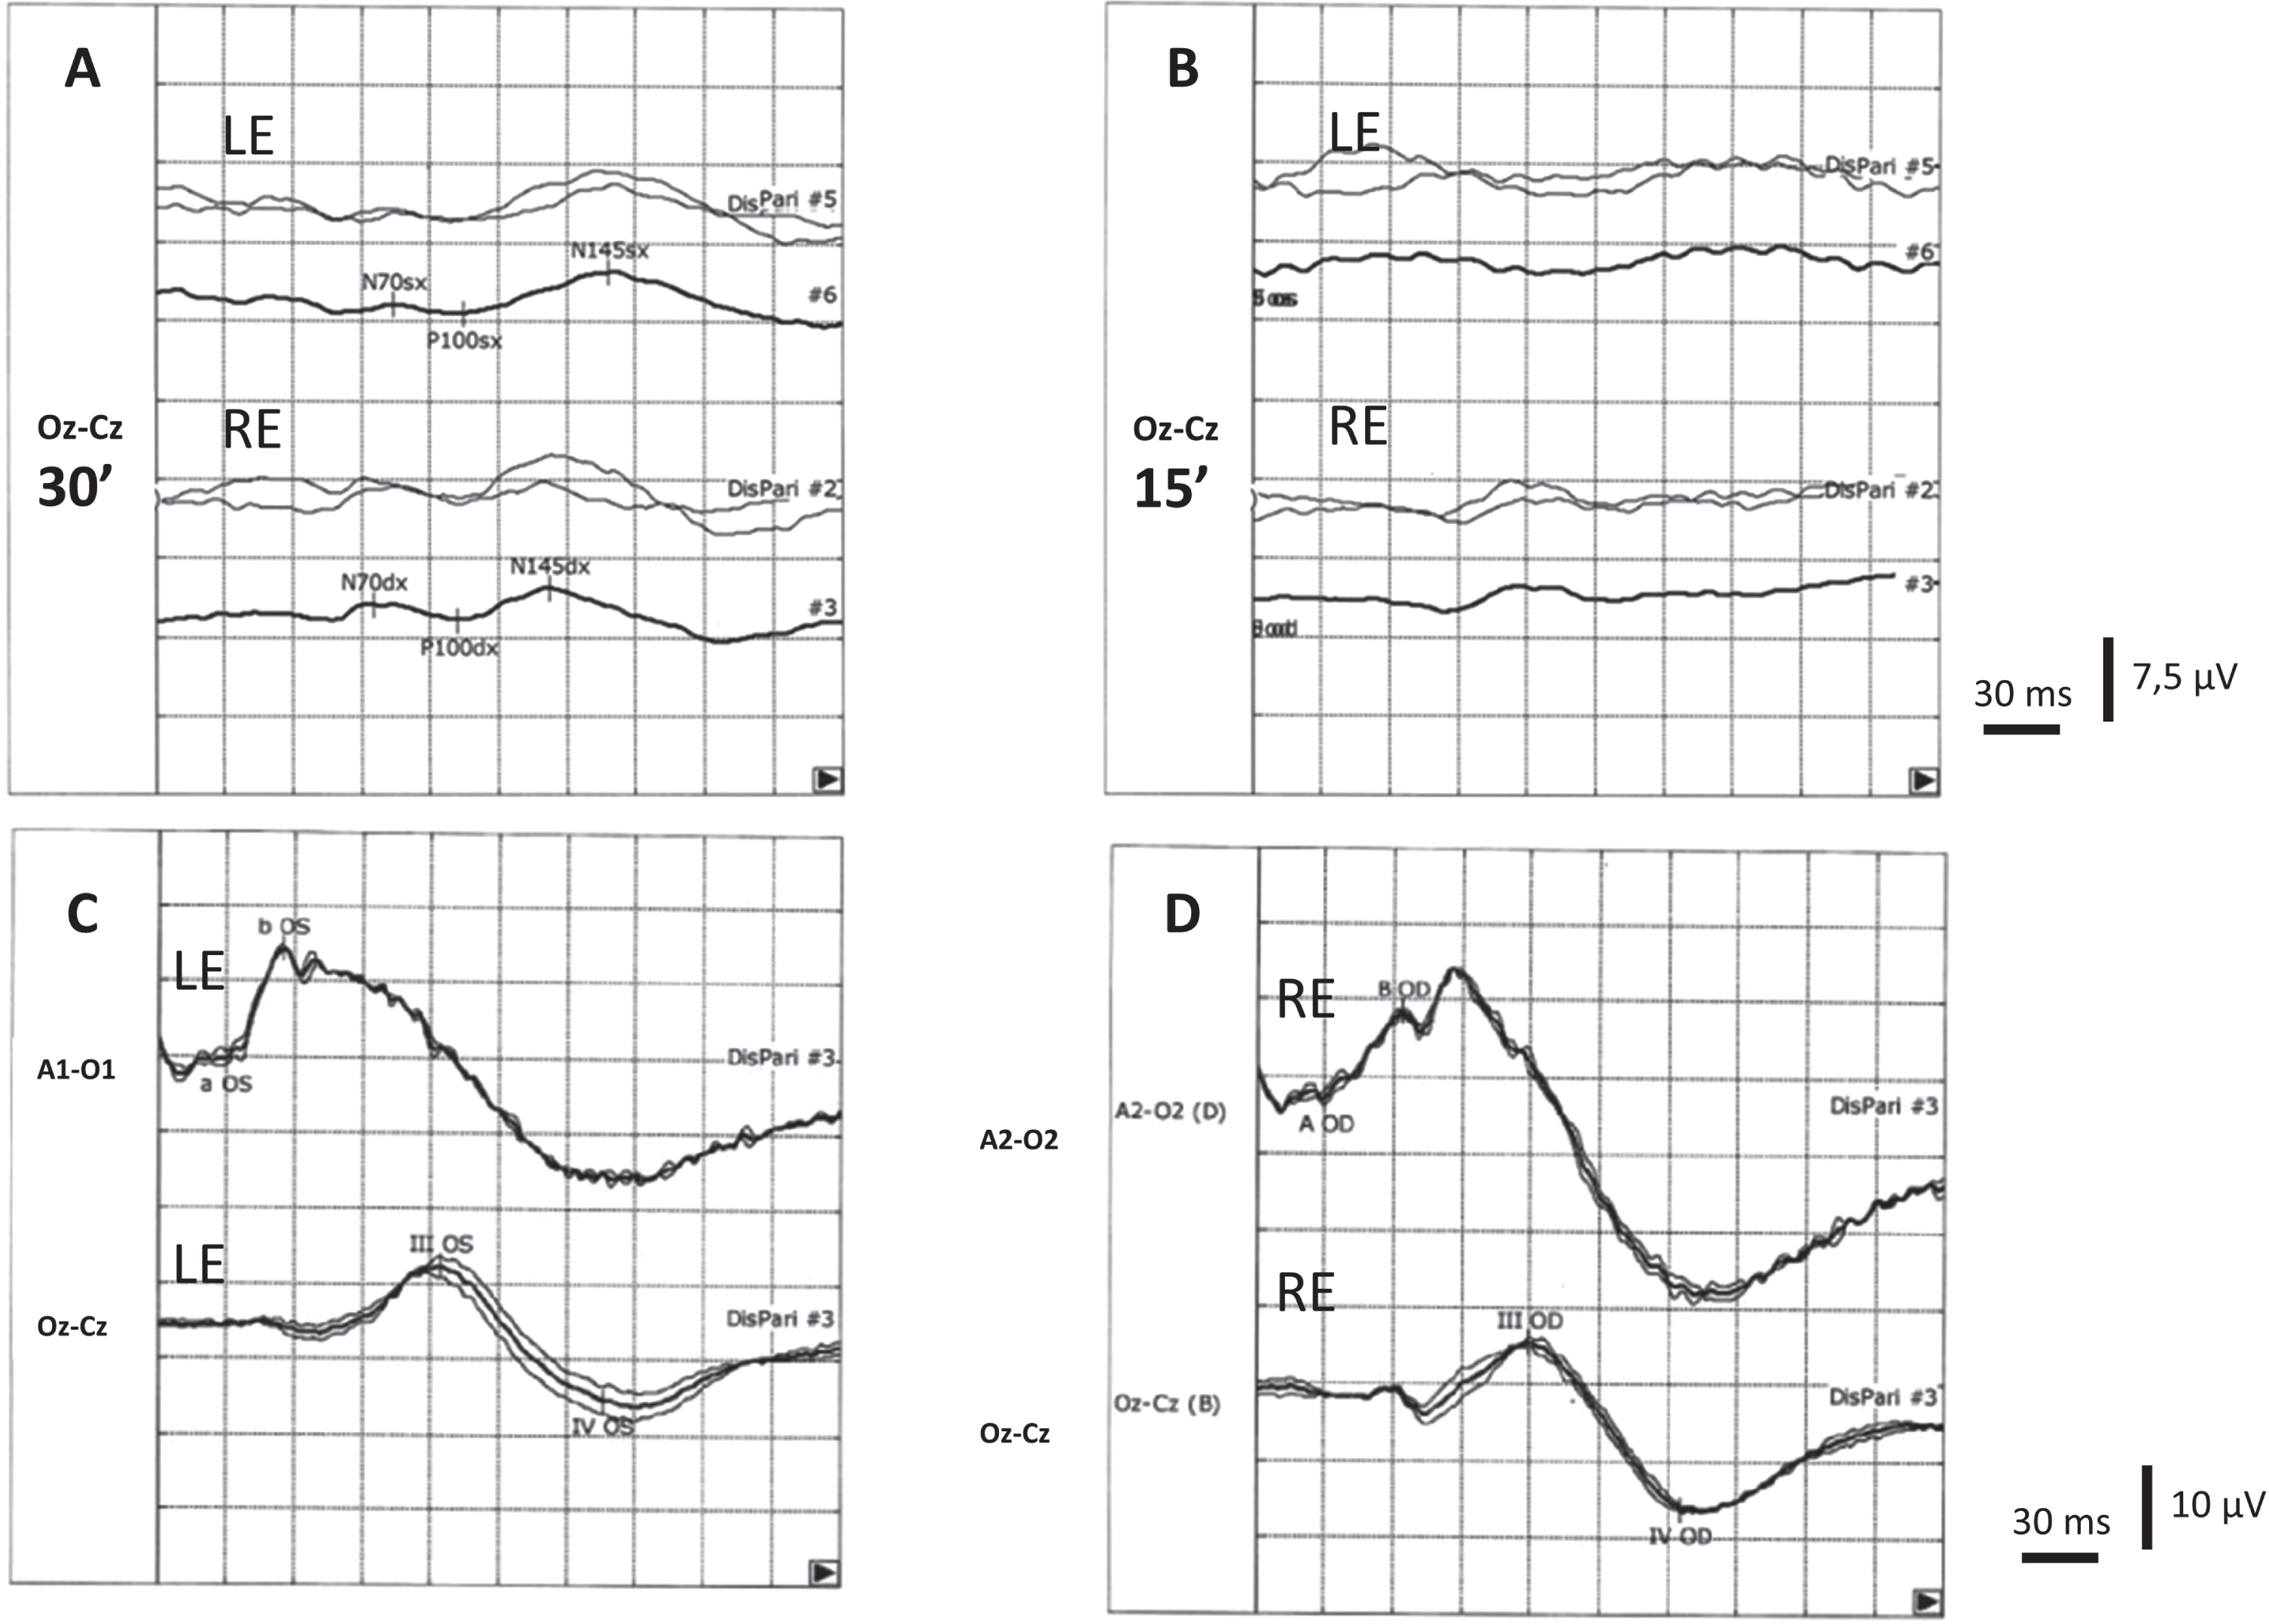 Visual evoked potentials (VEPs) performed by checkerboard pattern reversal stimuli system with 30’ (A) and 15’ (B) checks in our patient. All VEPs were recorded after monocular stimulation using Ag/AgCl skin electrodes placed accordingly to the 10–20 international system in Oz (active electrode) and Cz (reference electrode). Two series of 100 artifact-free responses were averaged for each check and each eye. The peak latency of the major positive wave (P100) was measured to the nearest millisecond. With 30’ checks the latency was 132 and 135 ms for right eye (RE) and left eye (LE) stimulation, respectively (upper normal limit: 118 ms), while the amplitude was 1.4μV and 0.8μV for right eye (RE) and left eye (LE) stimulation respectively (lower normal limit: 3μV). Cortical responses were non-recordable using the 15’ checks. Full-field electroretinogram (ERG) was recorded using flash stimulation of the LE (C) and RE (D) in mesopic condition by a Ag/AgCl a skin electrode placed over the ipsilateral ear lobe and reference electrode placed over the skin of the lower eyelid of the stimulated eye. Flash-induced VEPs (lower traces) were recorded by occipital surface electrode positioned as above said. III and IV waves were recordable after stimulation of both eyes.